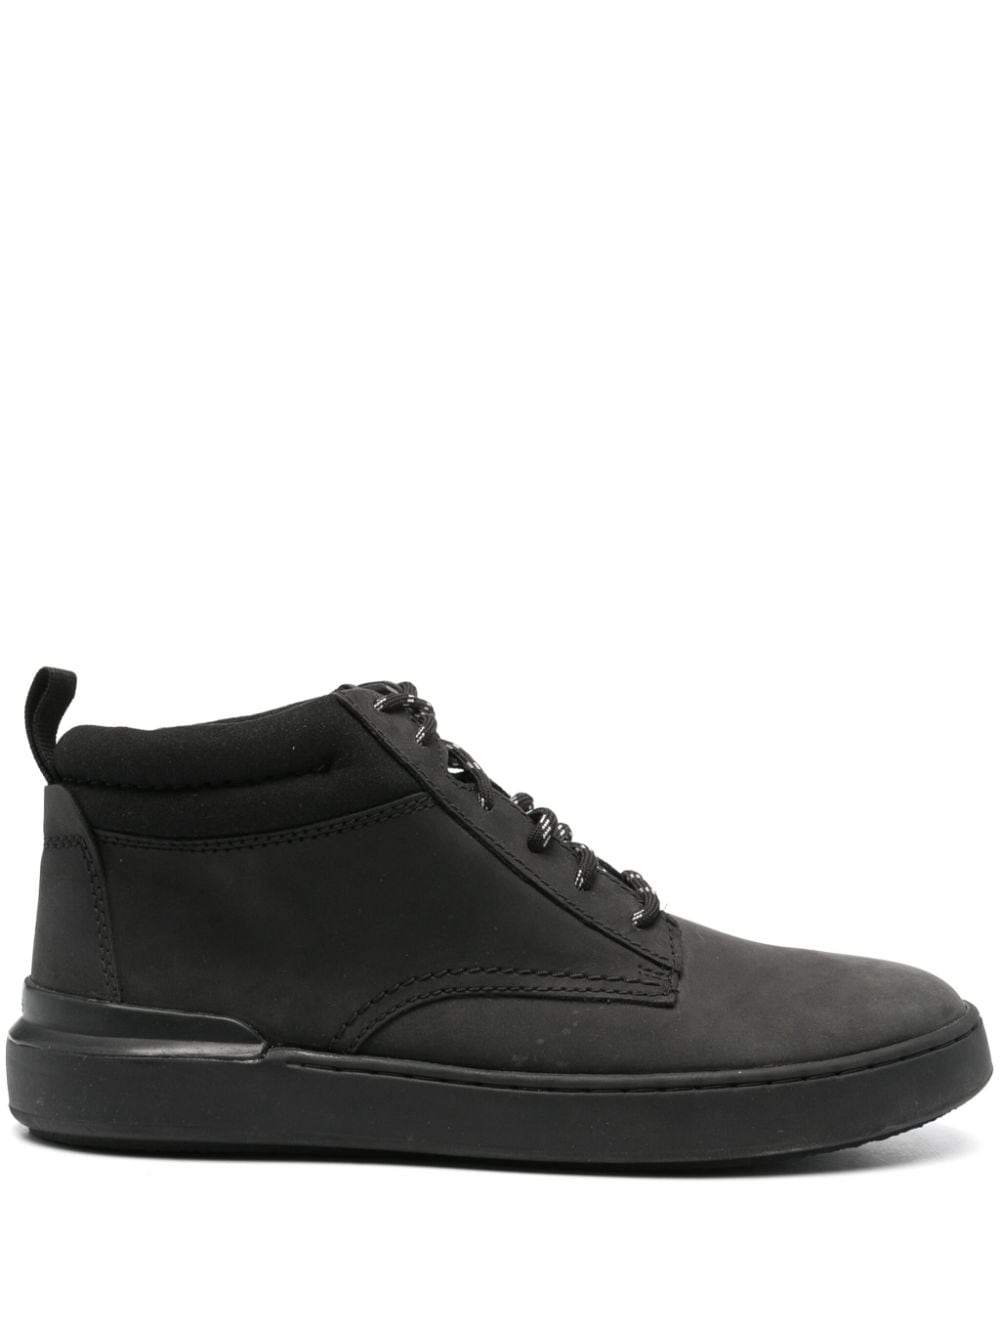 Clarks Courtlite Mid Leather Boots In Black